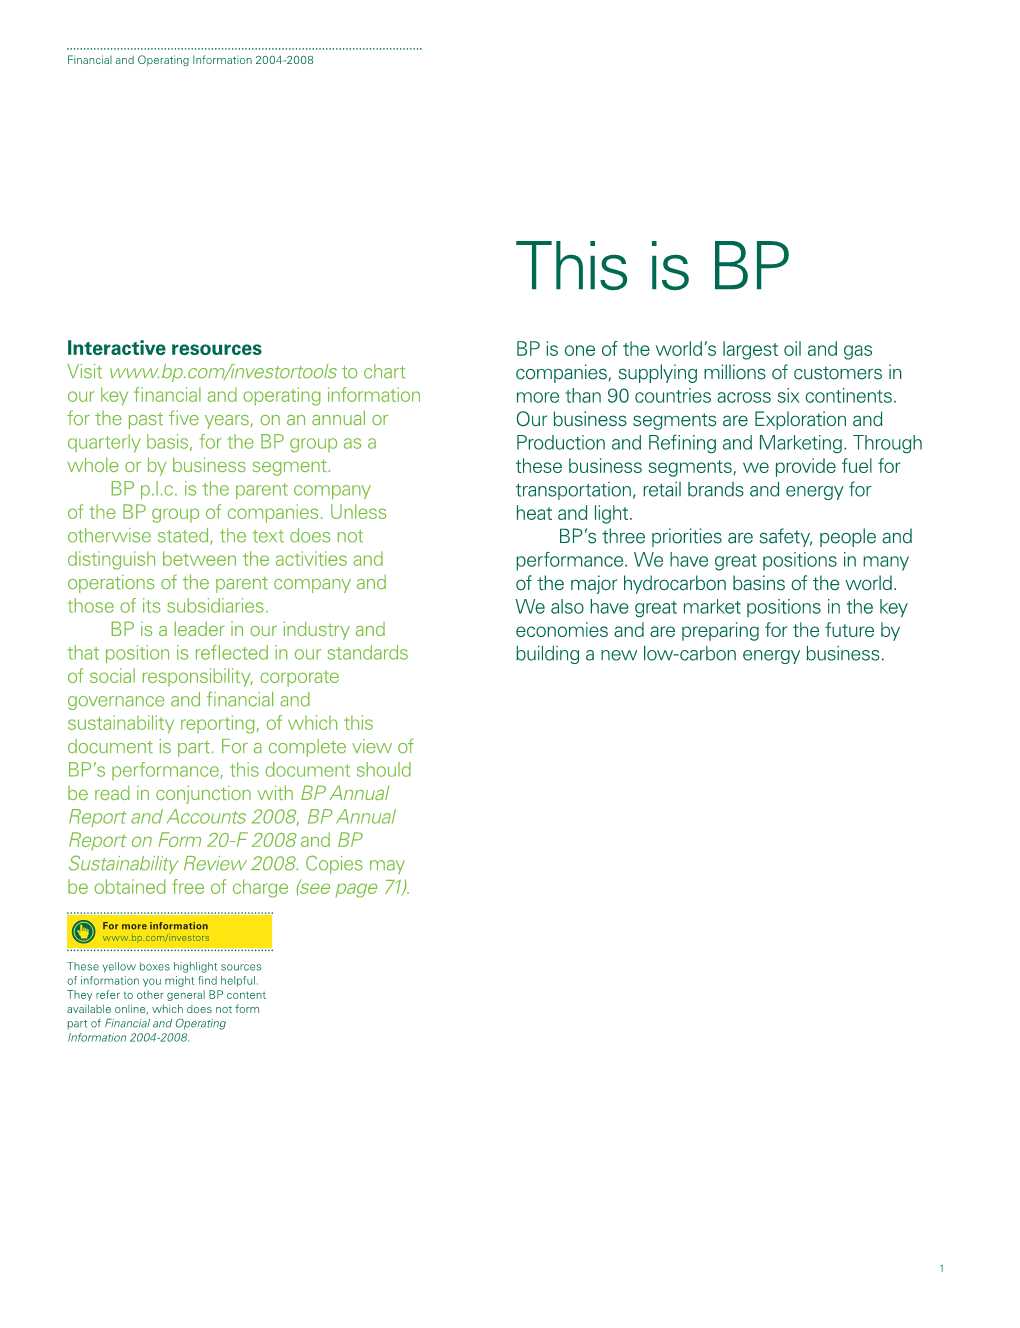 BP Financial and Operating Information 2004-2008